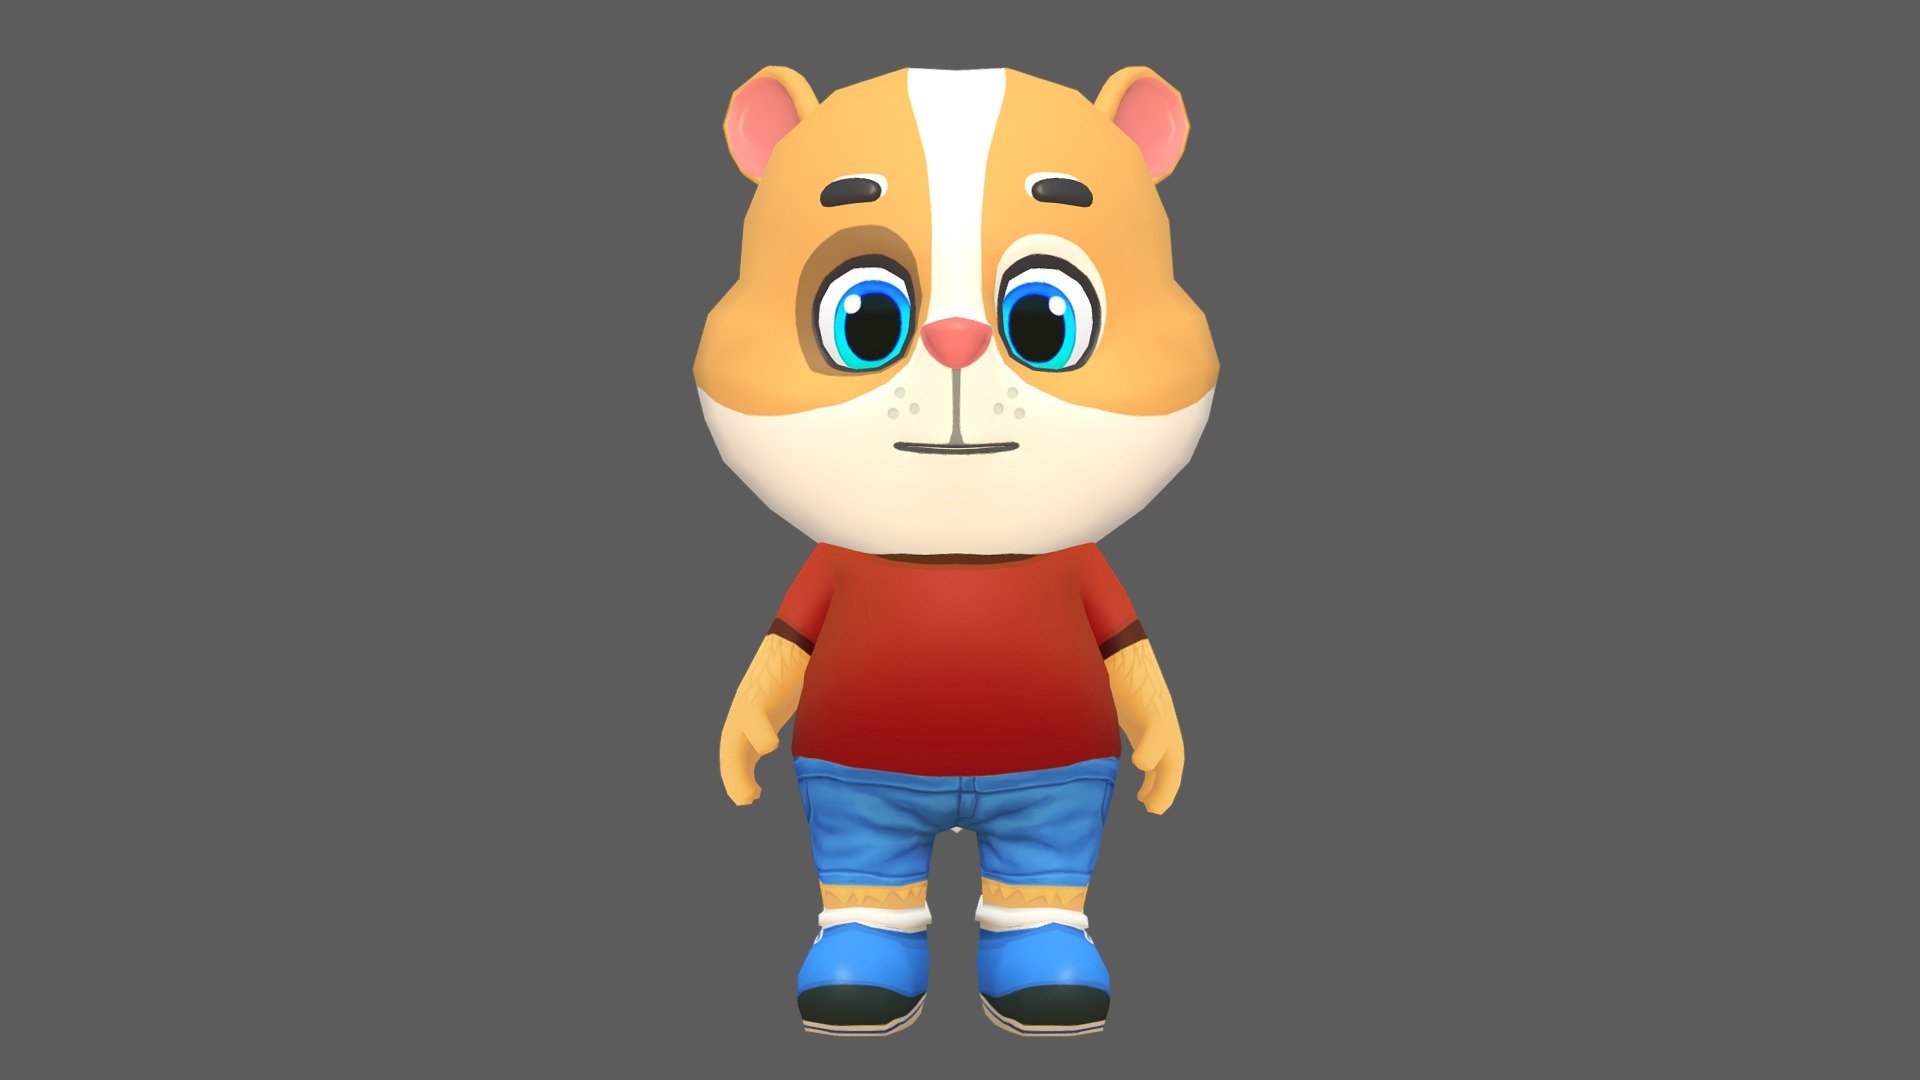 Hamster Guinea Pig Mouse character for games and animations. The model is game ready and compatible with game engines.

Included Files:




Maya (.ma, .mb) - 2015 - 2020

FBX - 2014 - 2020

OBJ

Supports Humanoid Animation:




Unity Humanoid compatible.

Mixamo and other humanoid animation libraries (MoCap).

Removable Tail.

Full Facial and Body Rig for further animation.

The model is lowpoly with four texture resolutions 4096x4096, 2048x2048, 1024x1024 &amp; 512x512.

The package includes 18 Animations:




Run

Idle

Jump

Leap left

Leap right

Skidding

Roll

Crash &amp; Death

Power up

Whirl

Whirl jump

Waving in air

Backwards run

Dizzy

Gum Bubble

Gliding

Waving

Looking behind

The model is fully rigged and can be easily animated in case further animating or modification is required.

The model is game ready at:




3508  Polygons

3502  Vertices

The model is UV mapped with non-overlapping UV's. The shadows and lights are baked in the texture 3d model